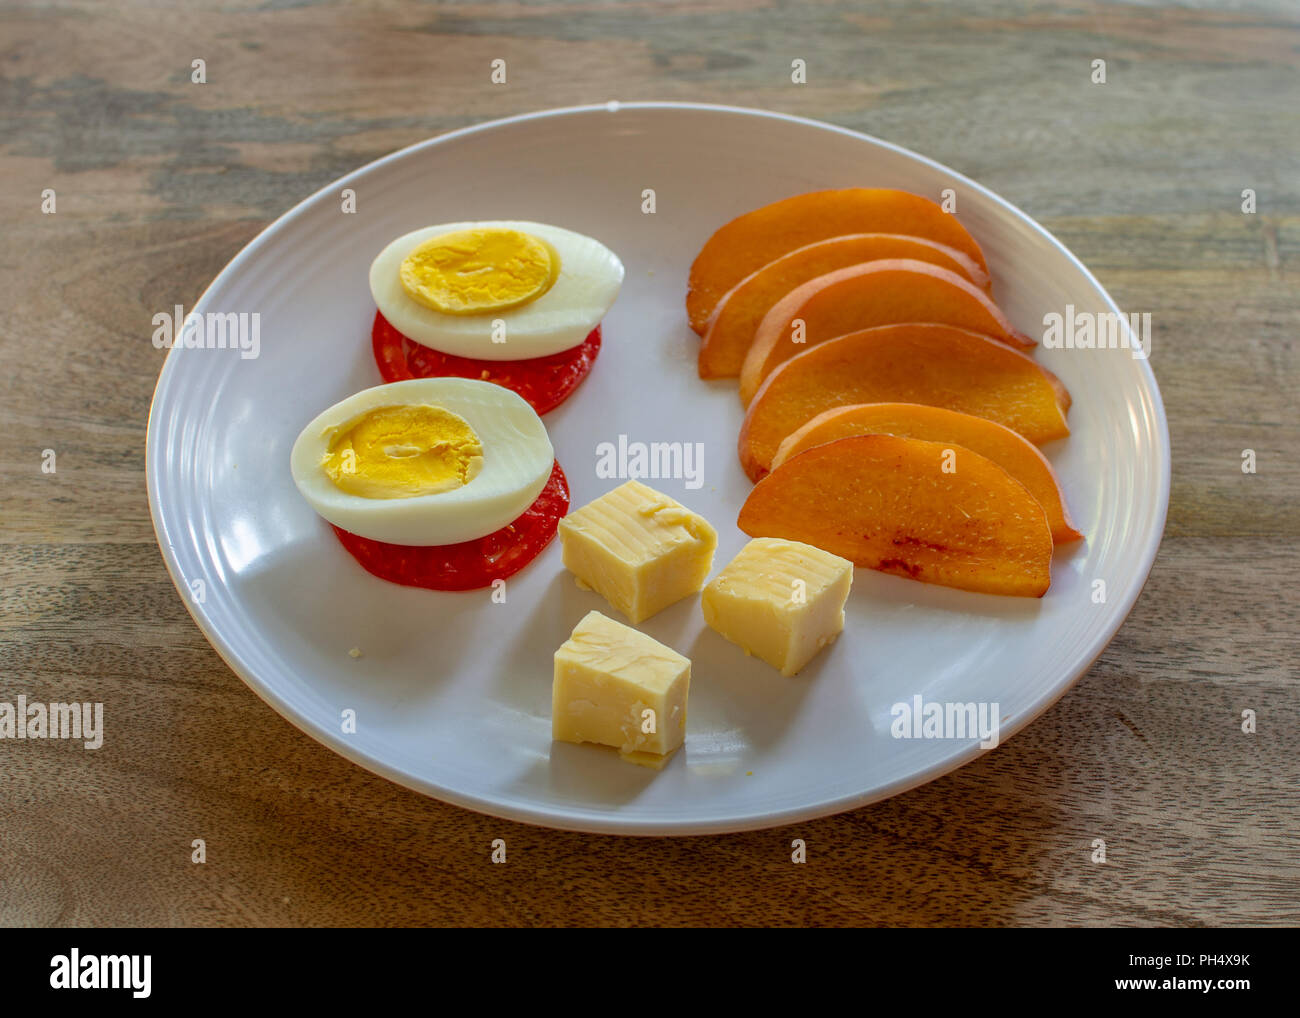 Sliced yellow peach on white plate with a boiled egg, tomatoes and cheese on aged wood background - healthy low-carbohydrate meal rich in proteins Stock Photo